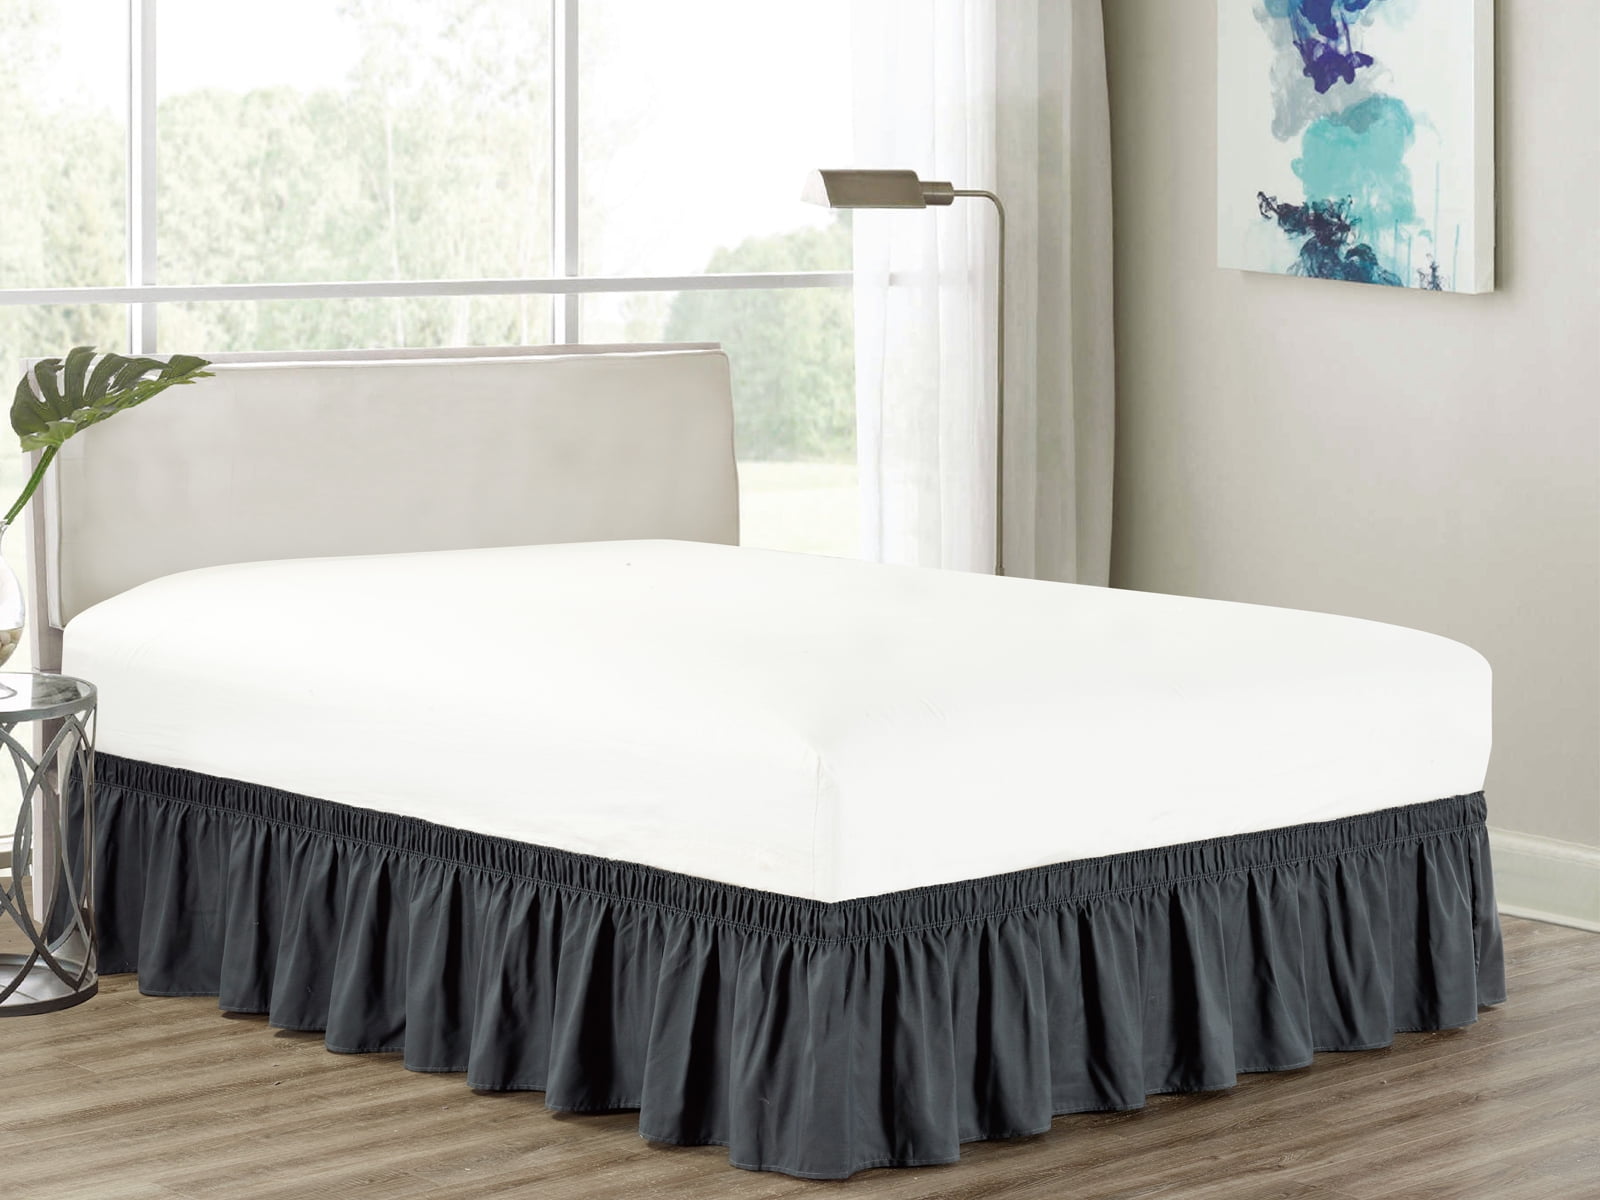 Extra Gift: Elastic Band Dark Grey, Full Box Spring Cover Box Spring Wrap Queen/King Sleek Alternative for Bed Skirts